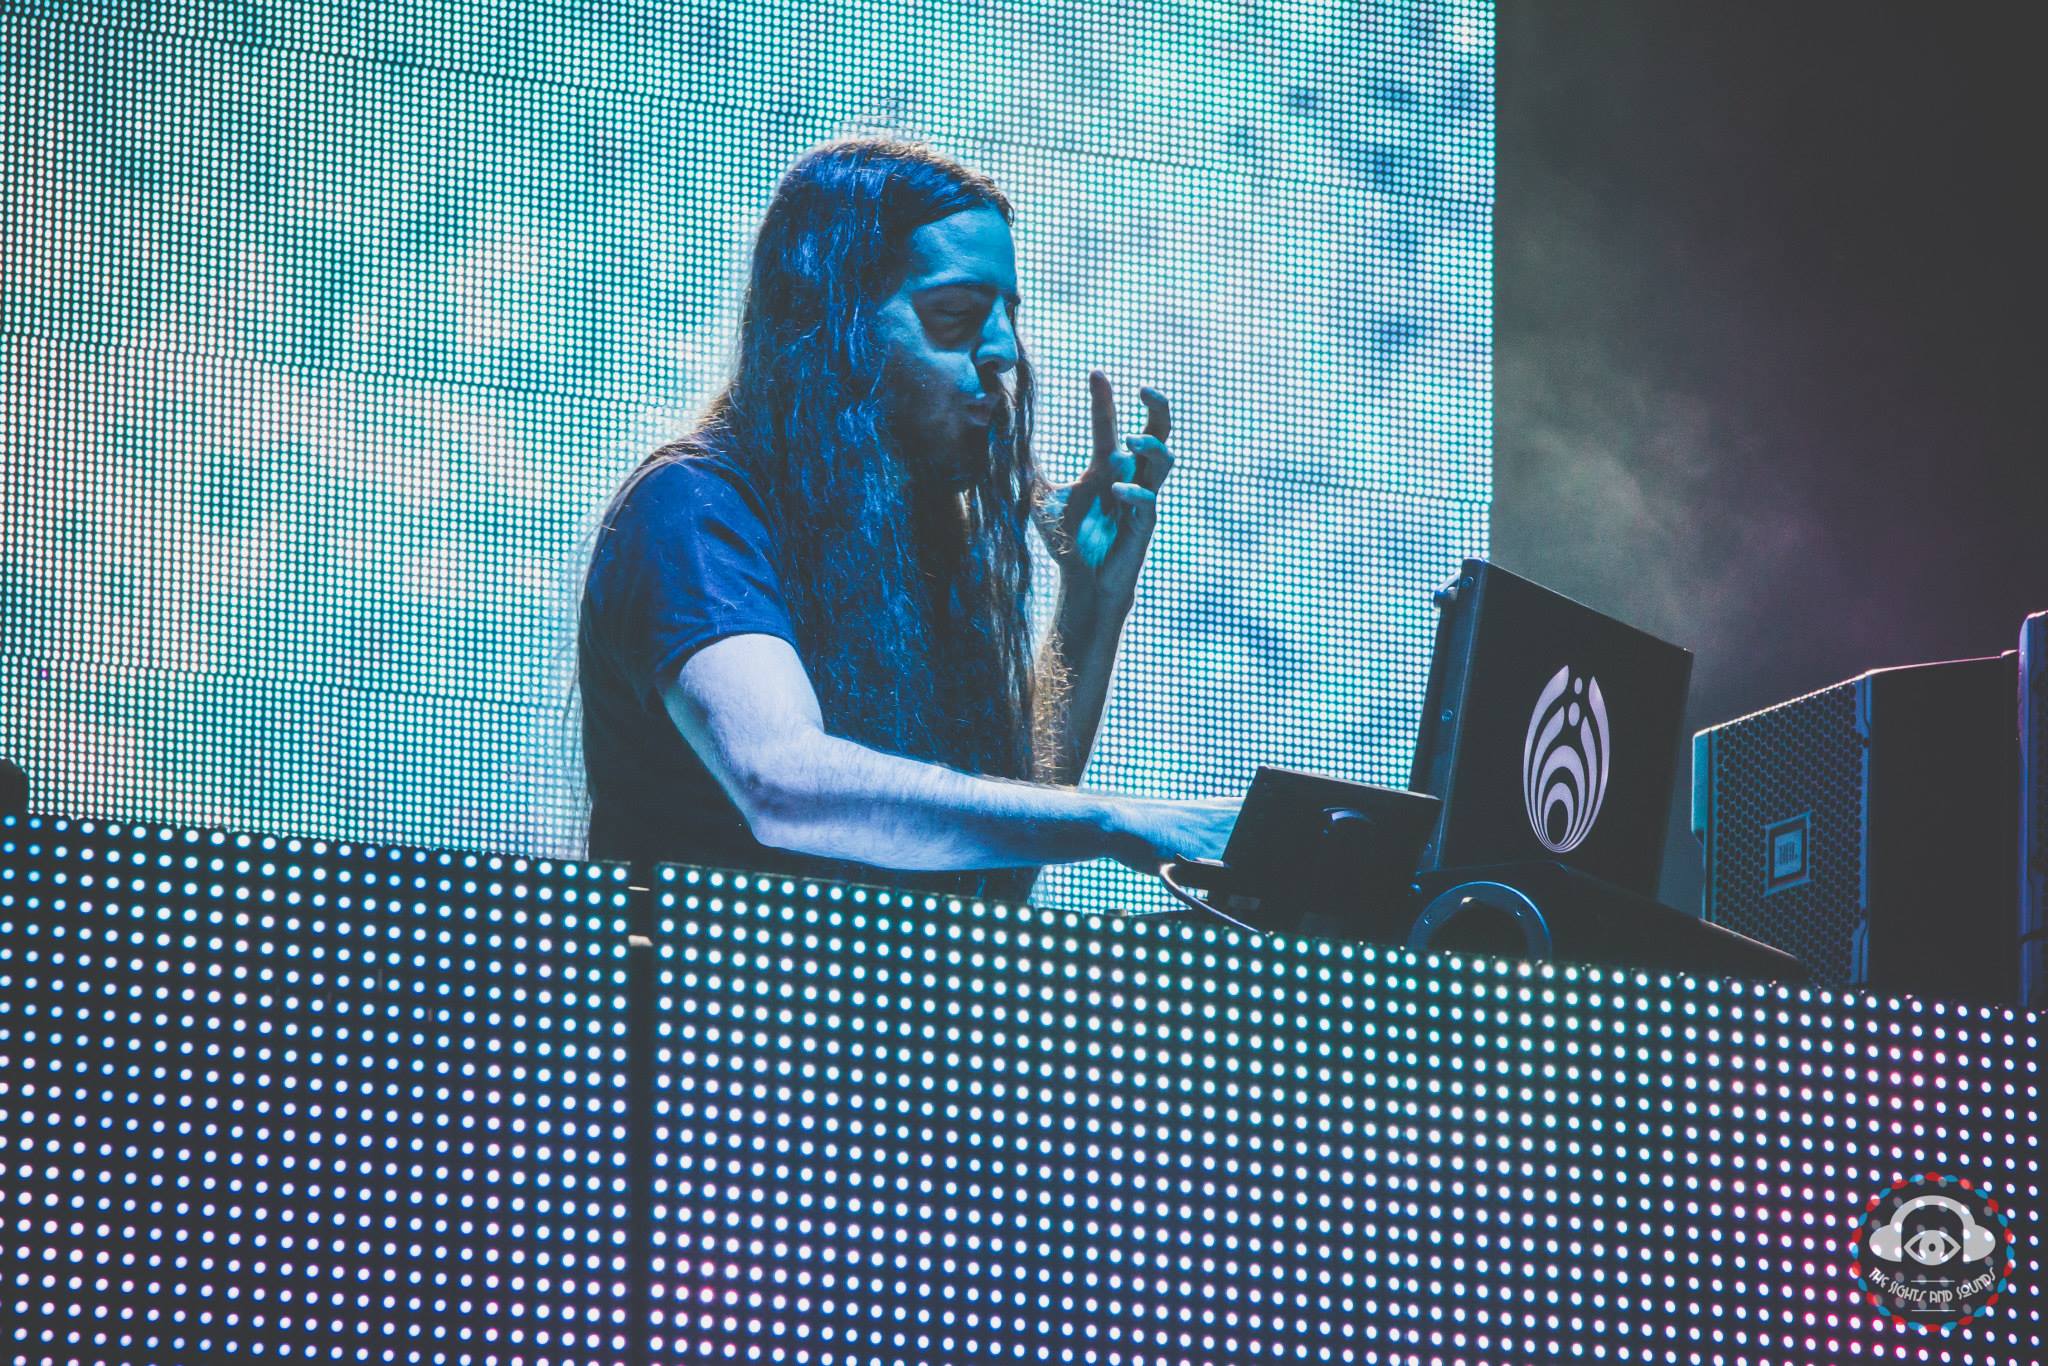 [BASS/ELECTRONIC] Bassnectar Hits Home Again With New Album ‘Unlimited’